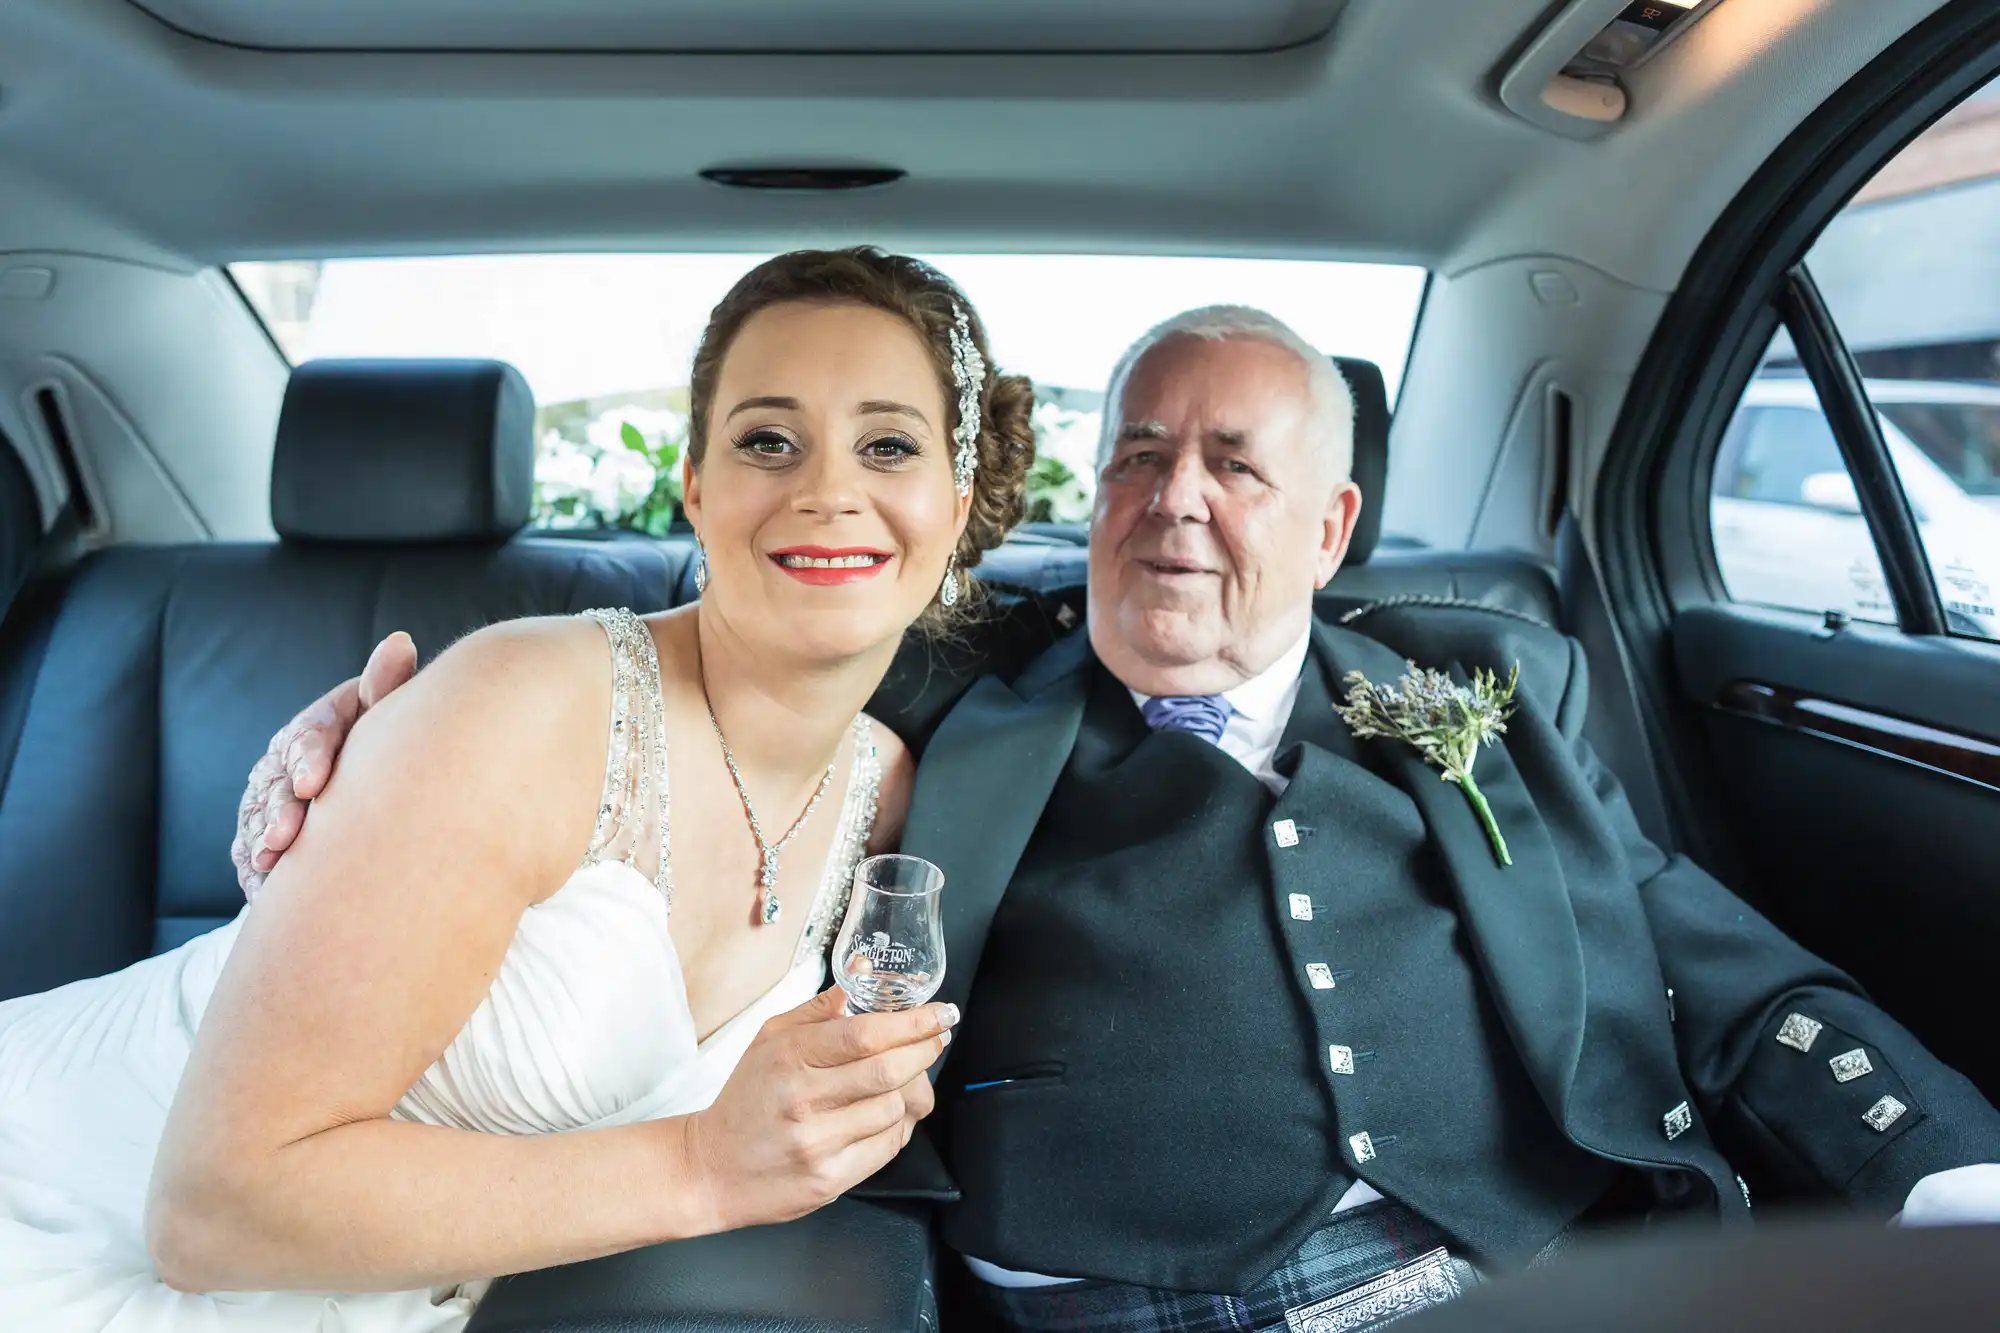 A bride in a white dress sits next to an older man in a kilt and suit inside a car, both smiling at the camera, the bride holding a champagne glass.